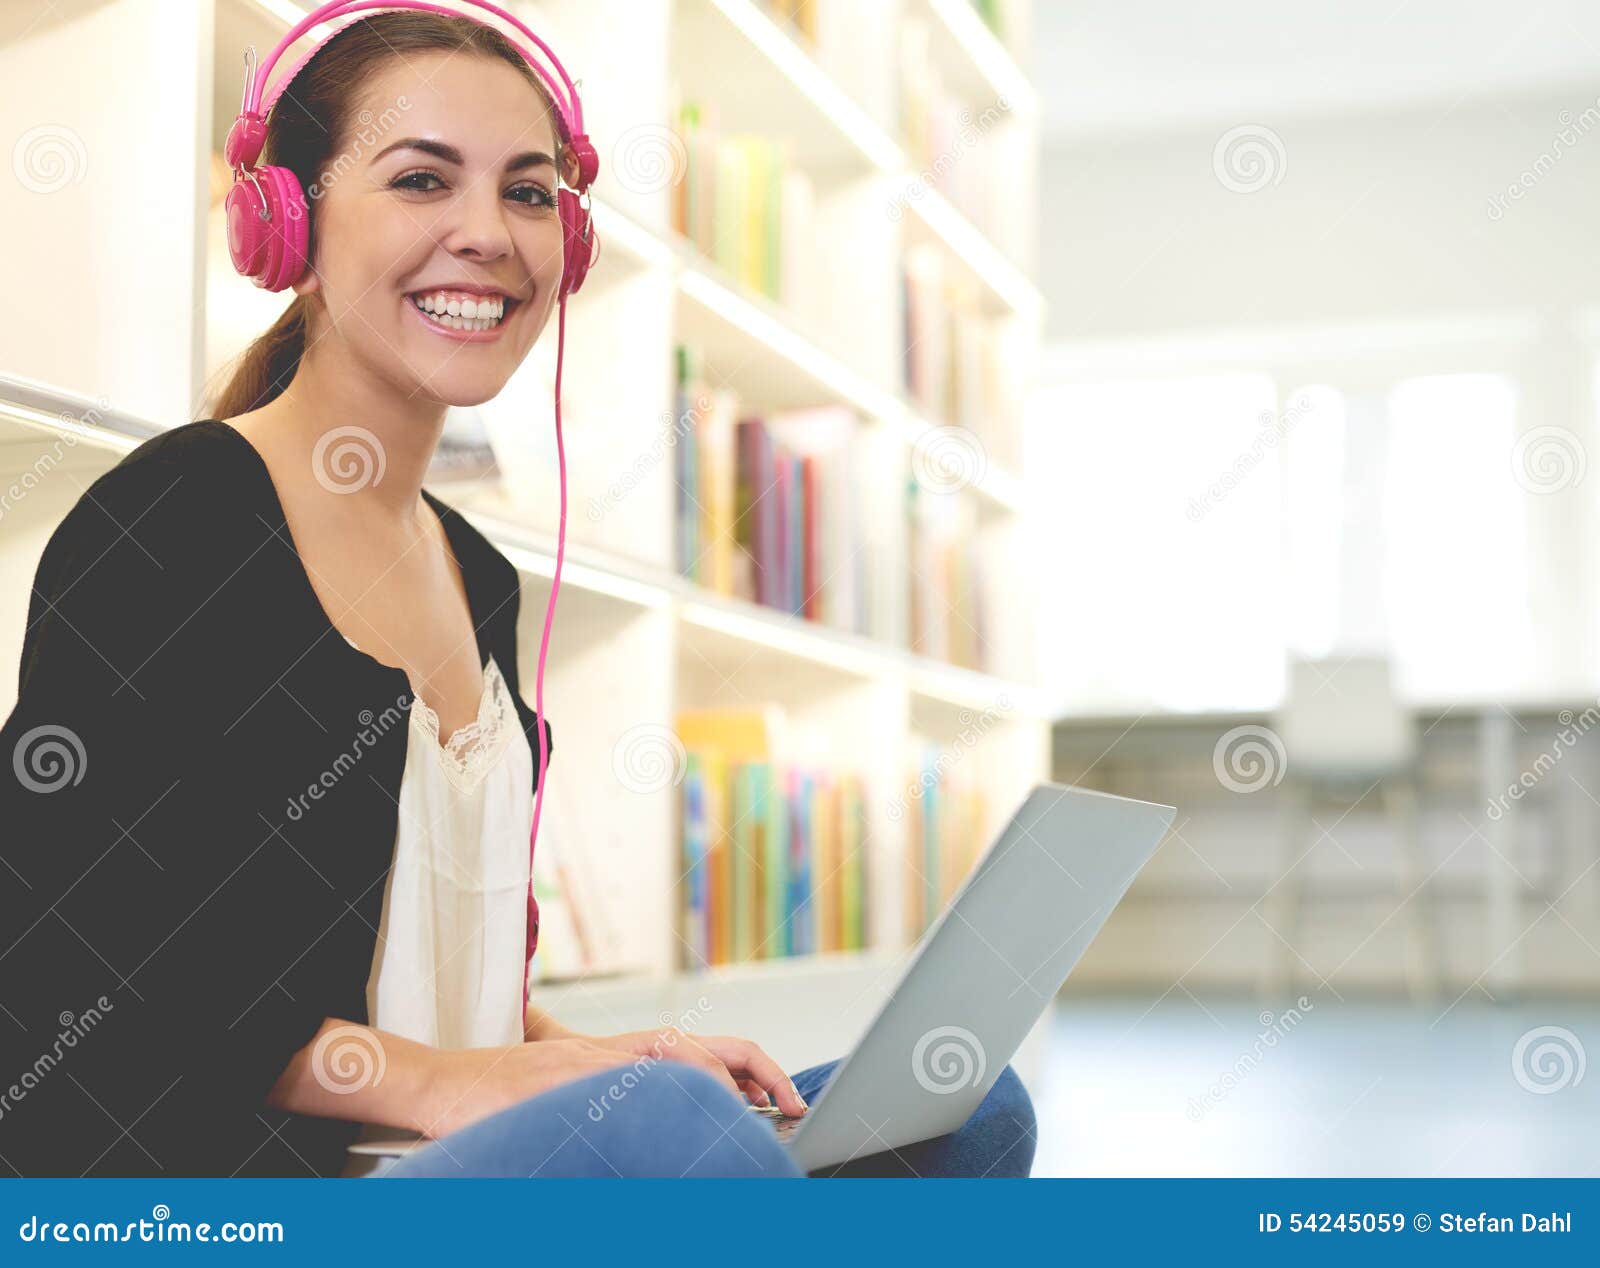 young woman listening to music as she studies